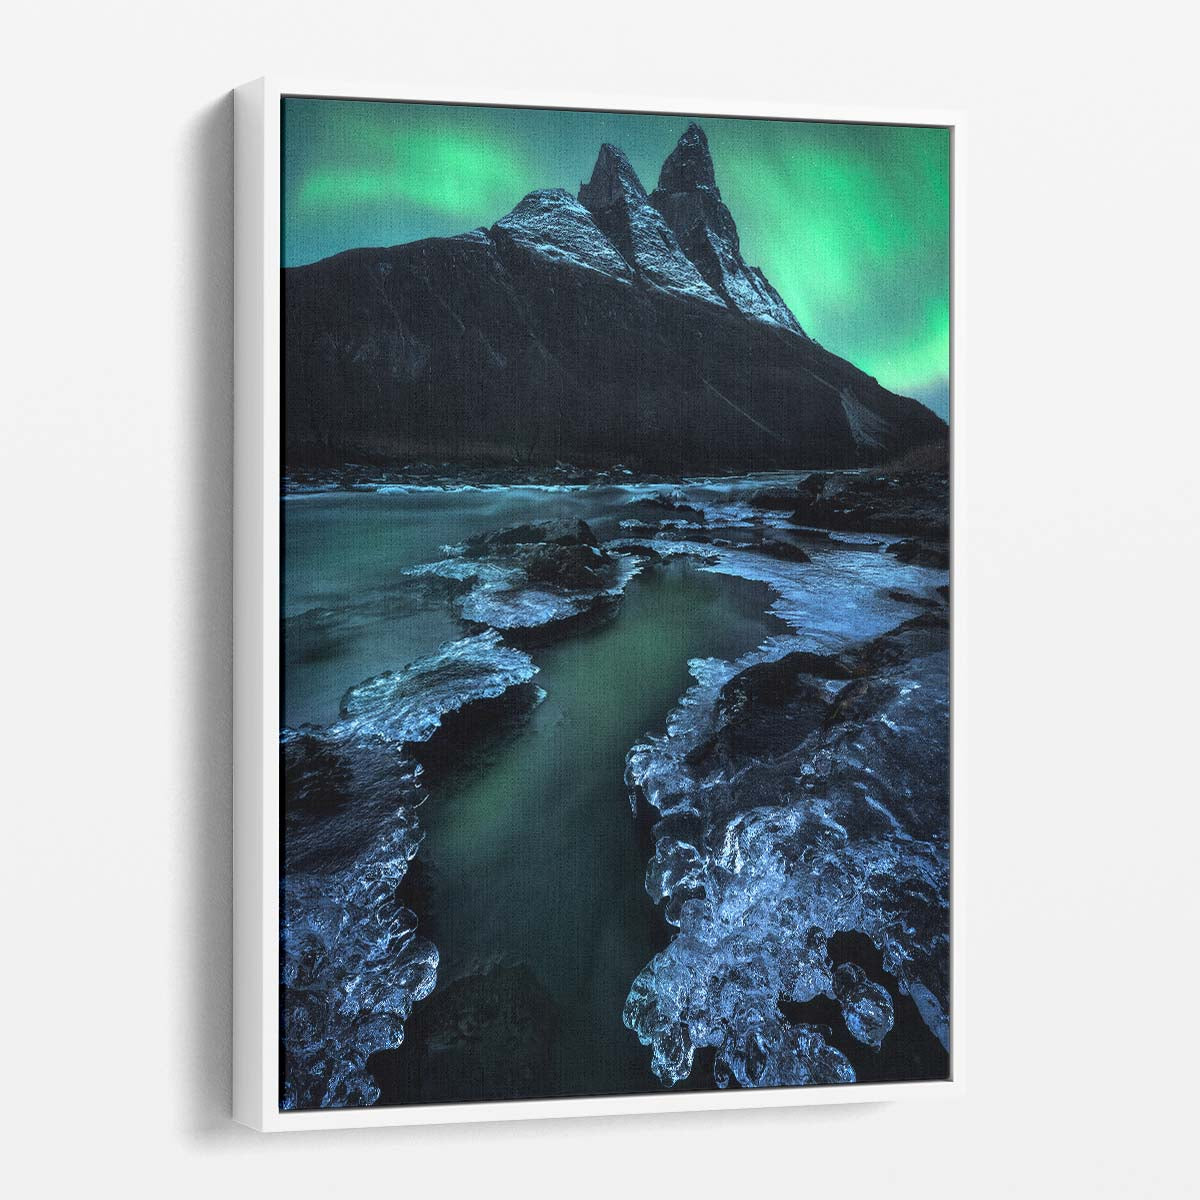 Aurora Borealis Night Sky Starry Mountain Photography Art by Luxuriance Designs, made in USA